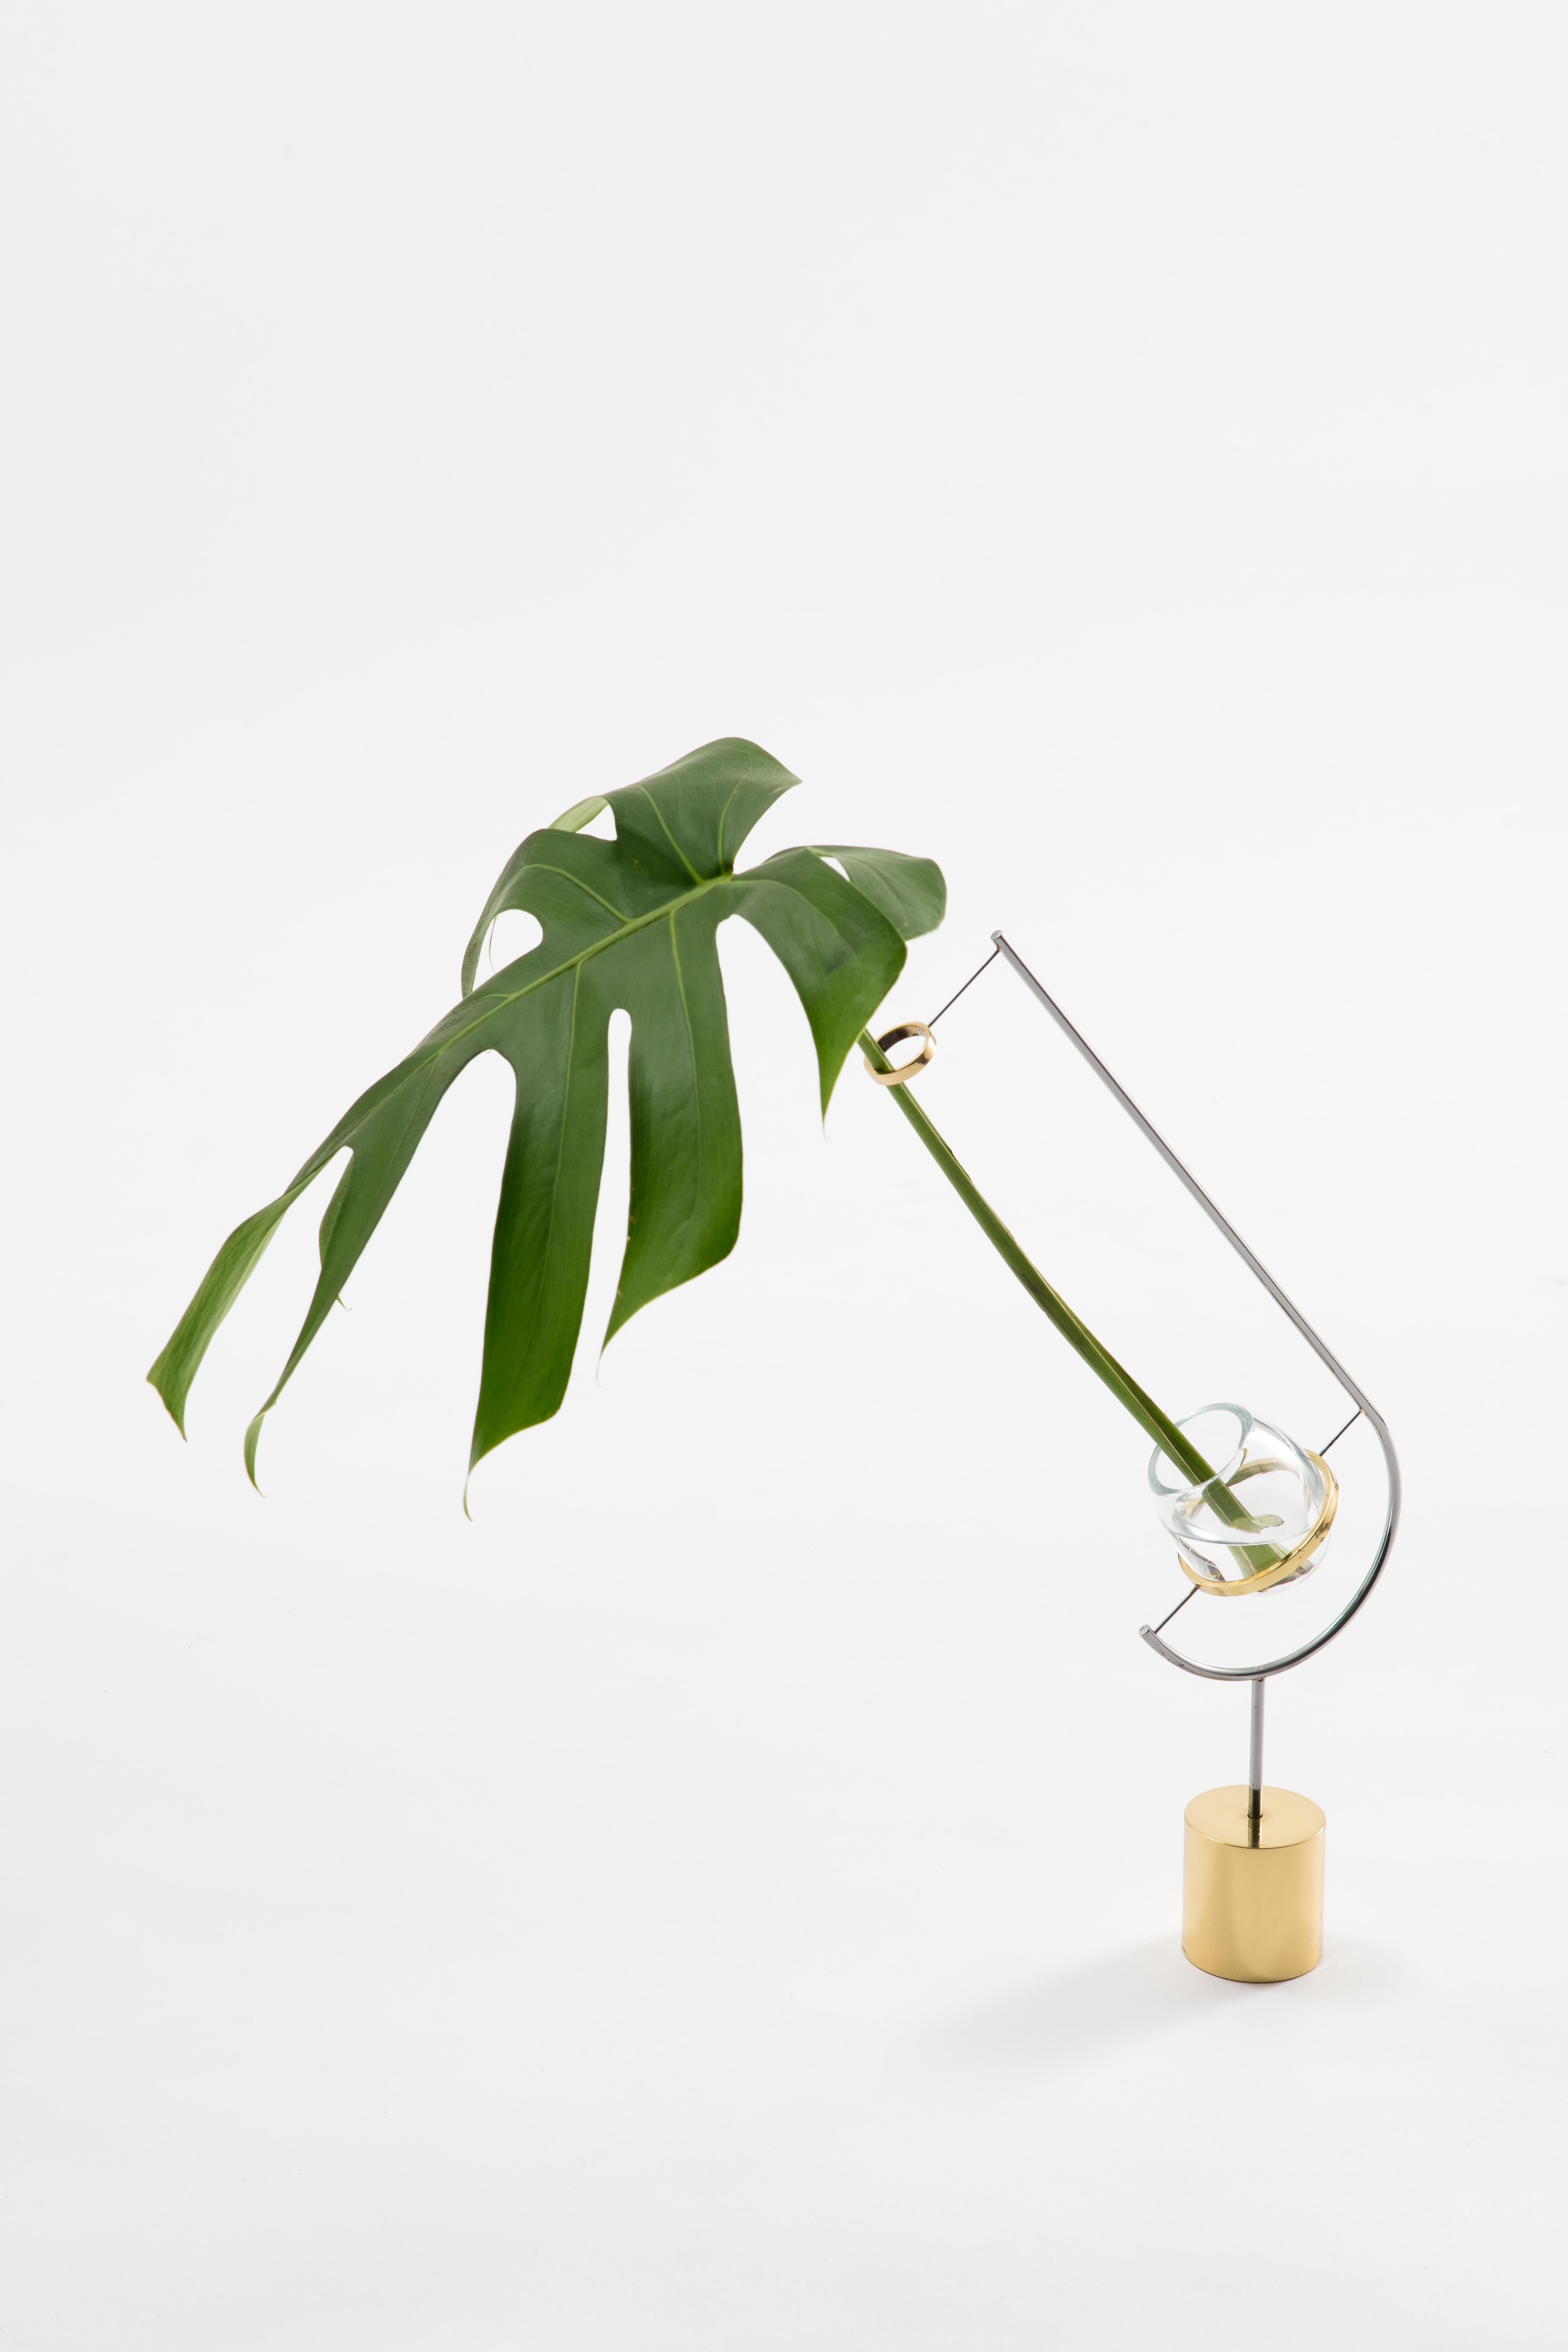 V3 vase - Monstera by Paulo Goldstein, Brazilian contemporary design is part of a series of vases inspired in the observation of the natural lines of the flowers and leaves held in them, where the lines of the vases were designed to enhance and